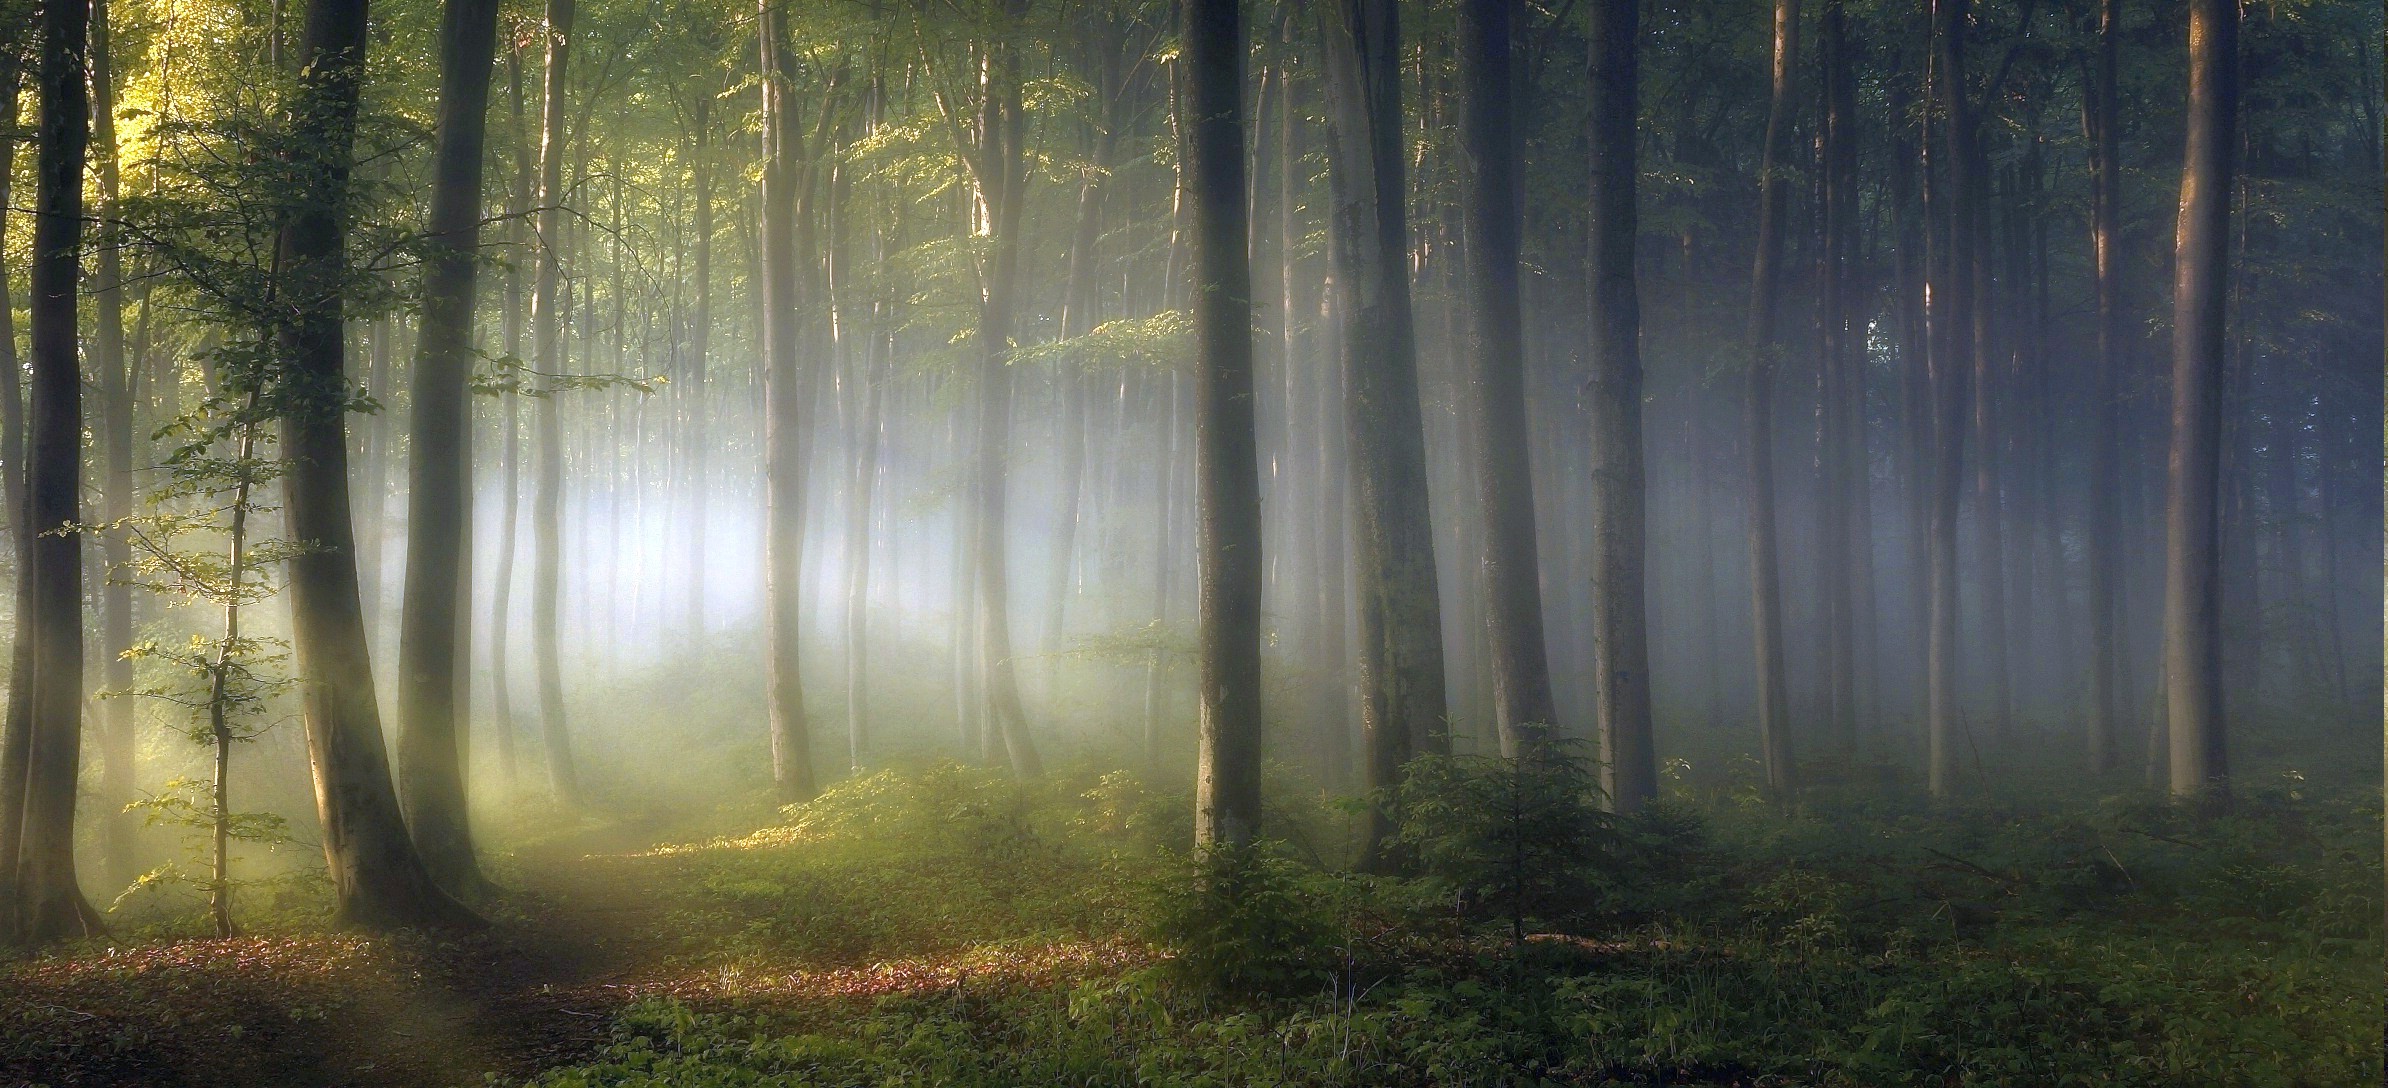 General 2388x1088 nature forest trees mist sun rays leaves dappled sunlight plants morning branch